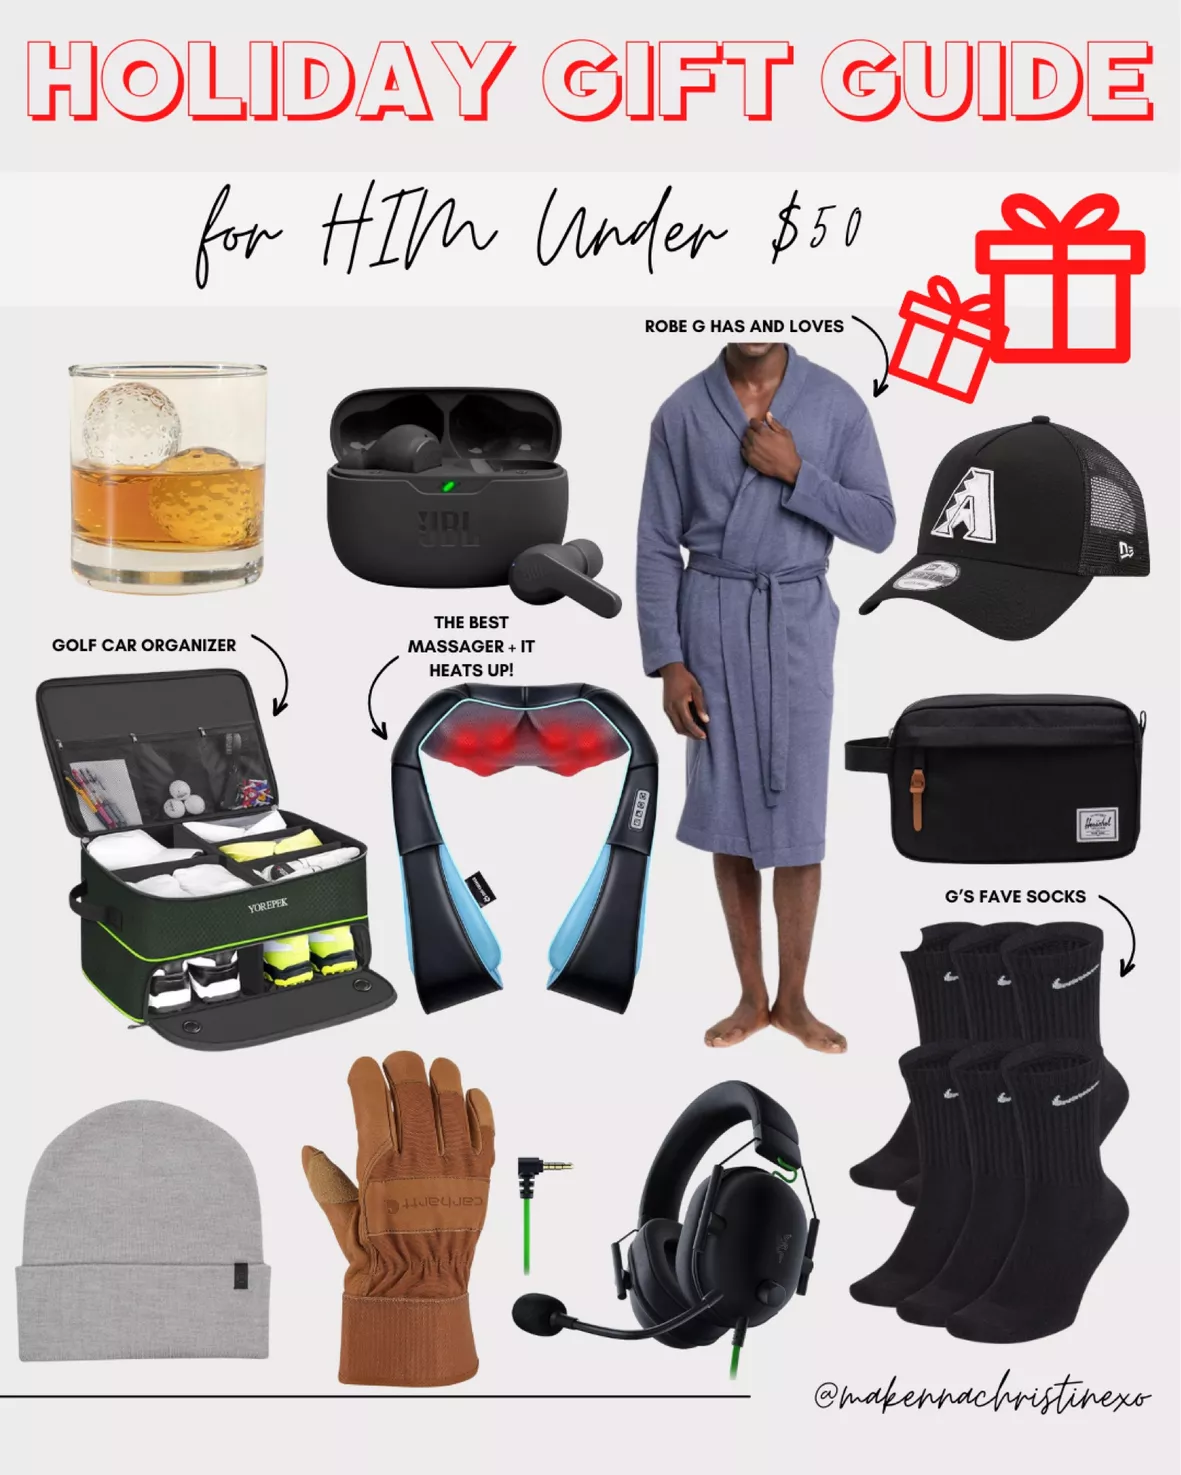 Gifts for Him Under $50!